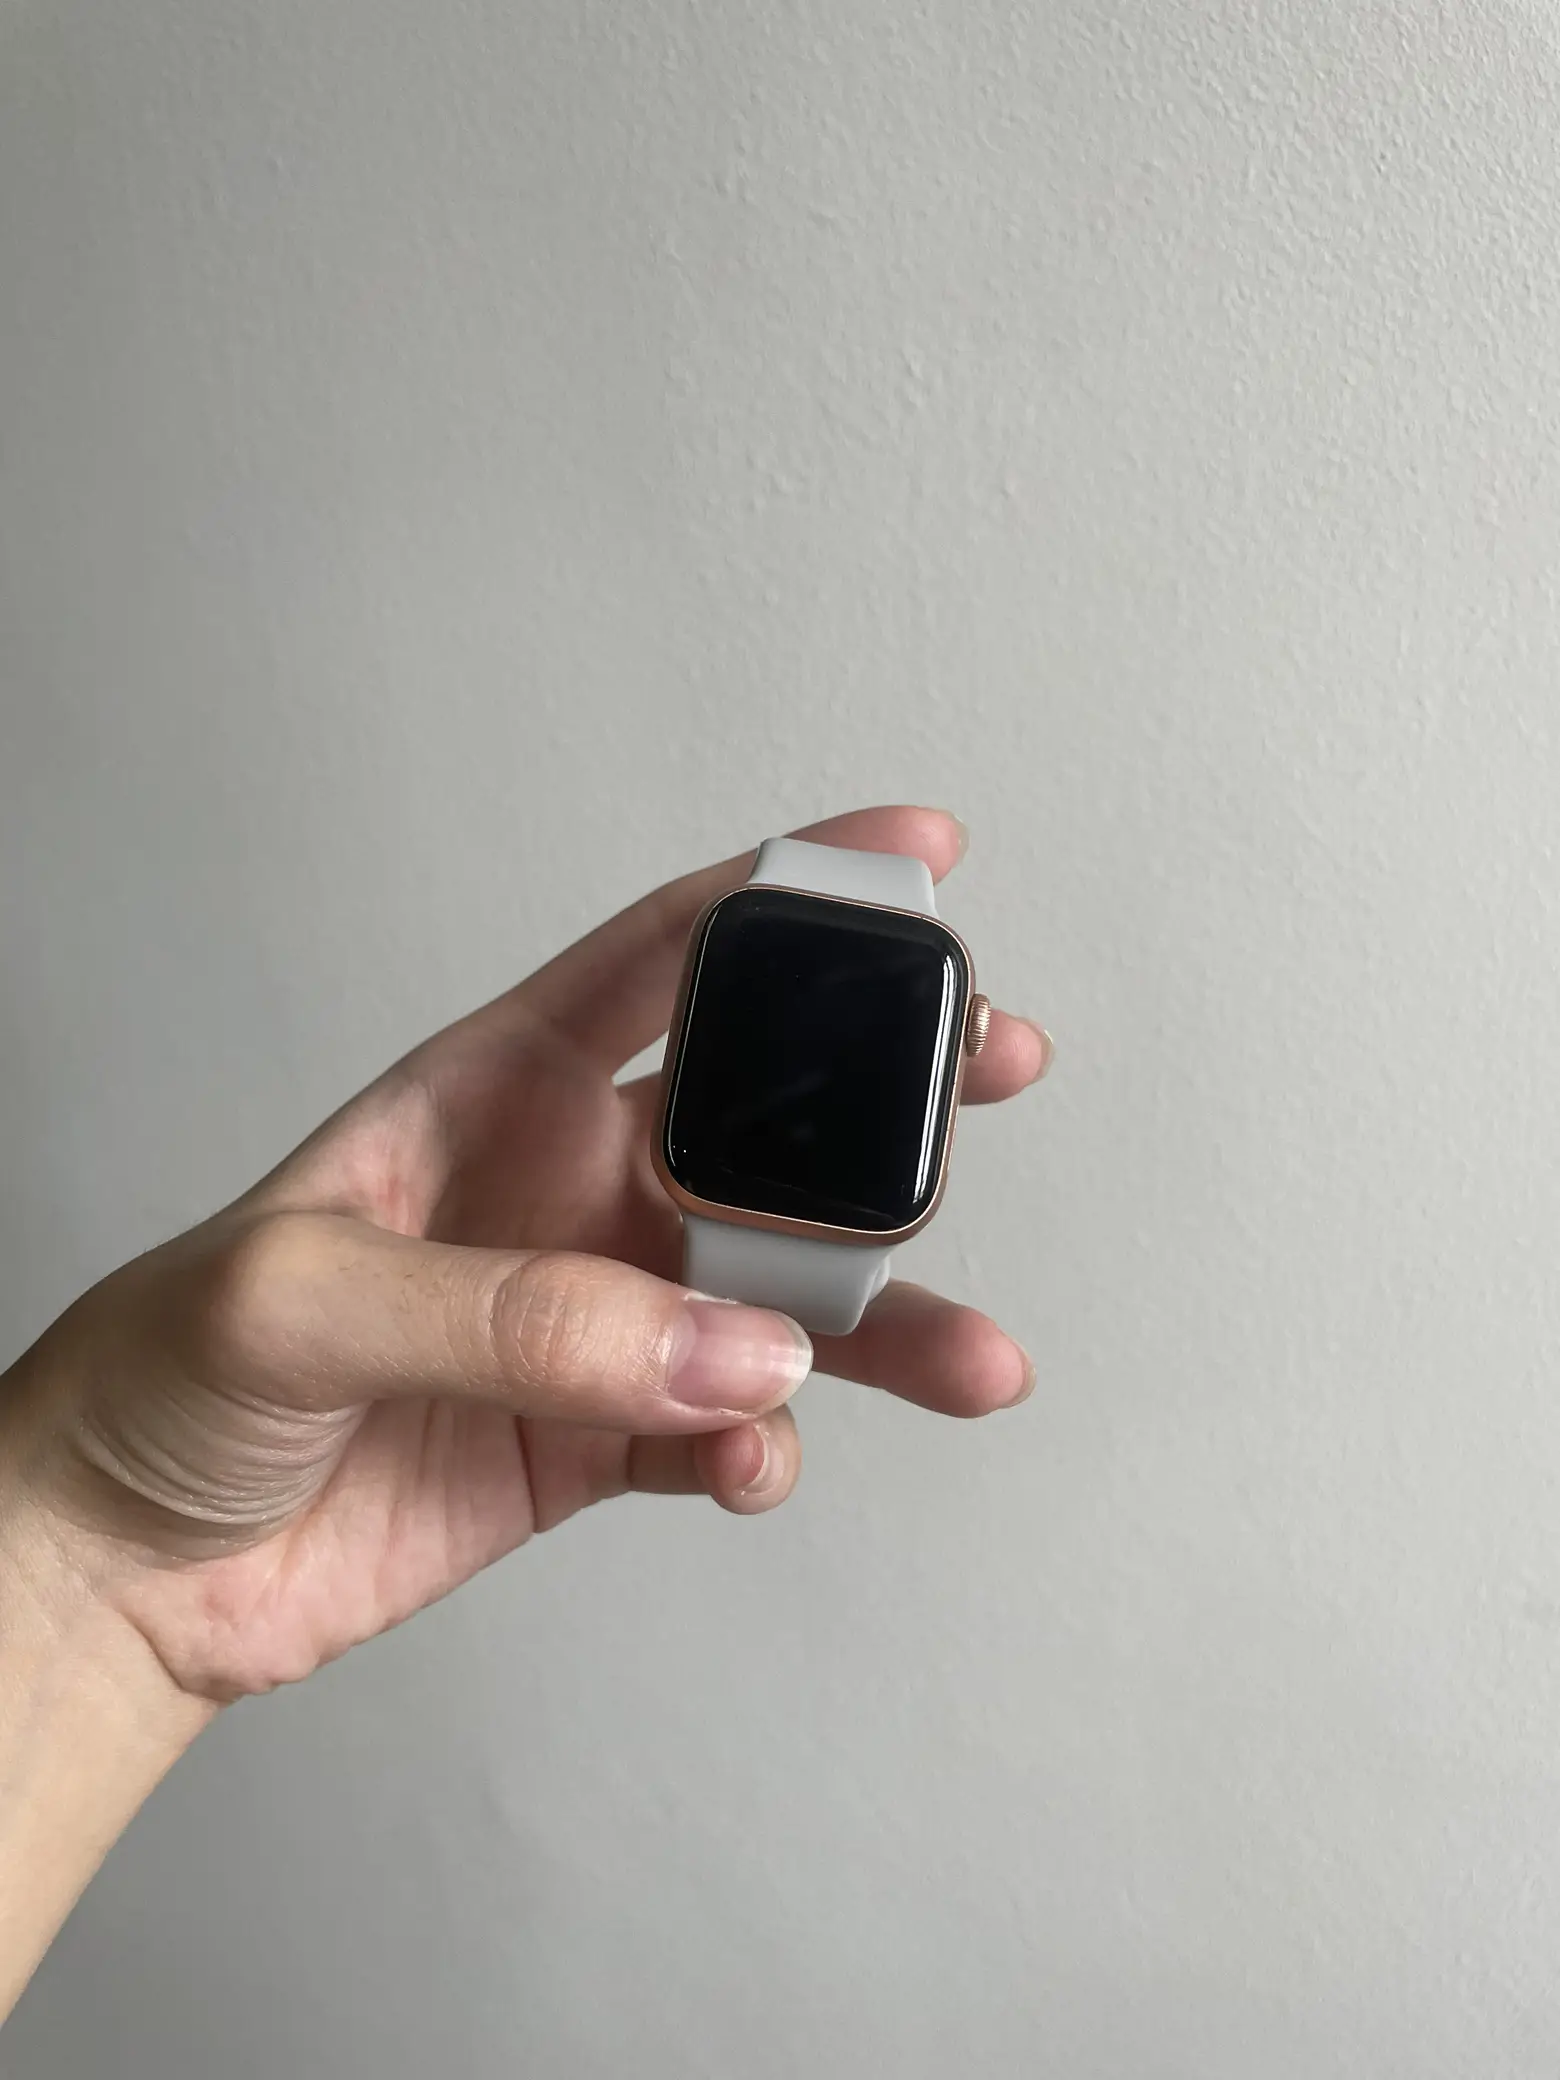 How to change apple watch face - Lemon8 Search